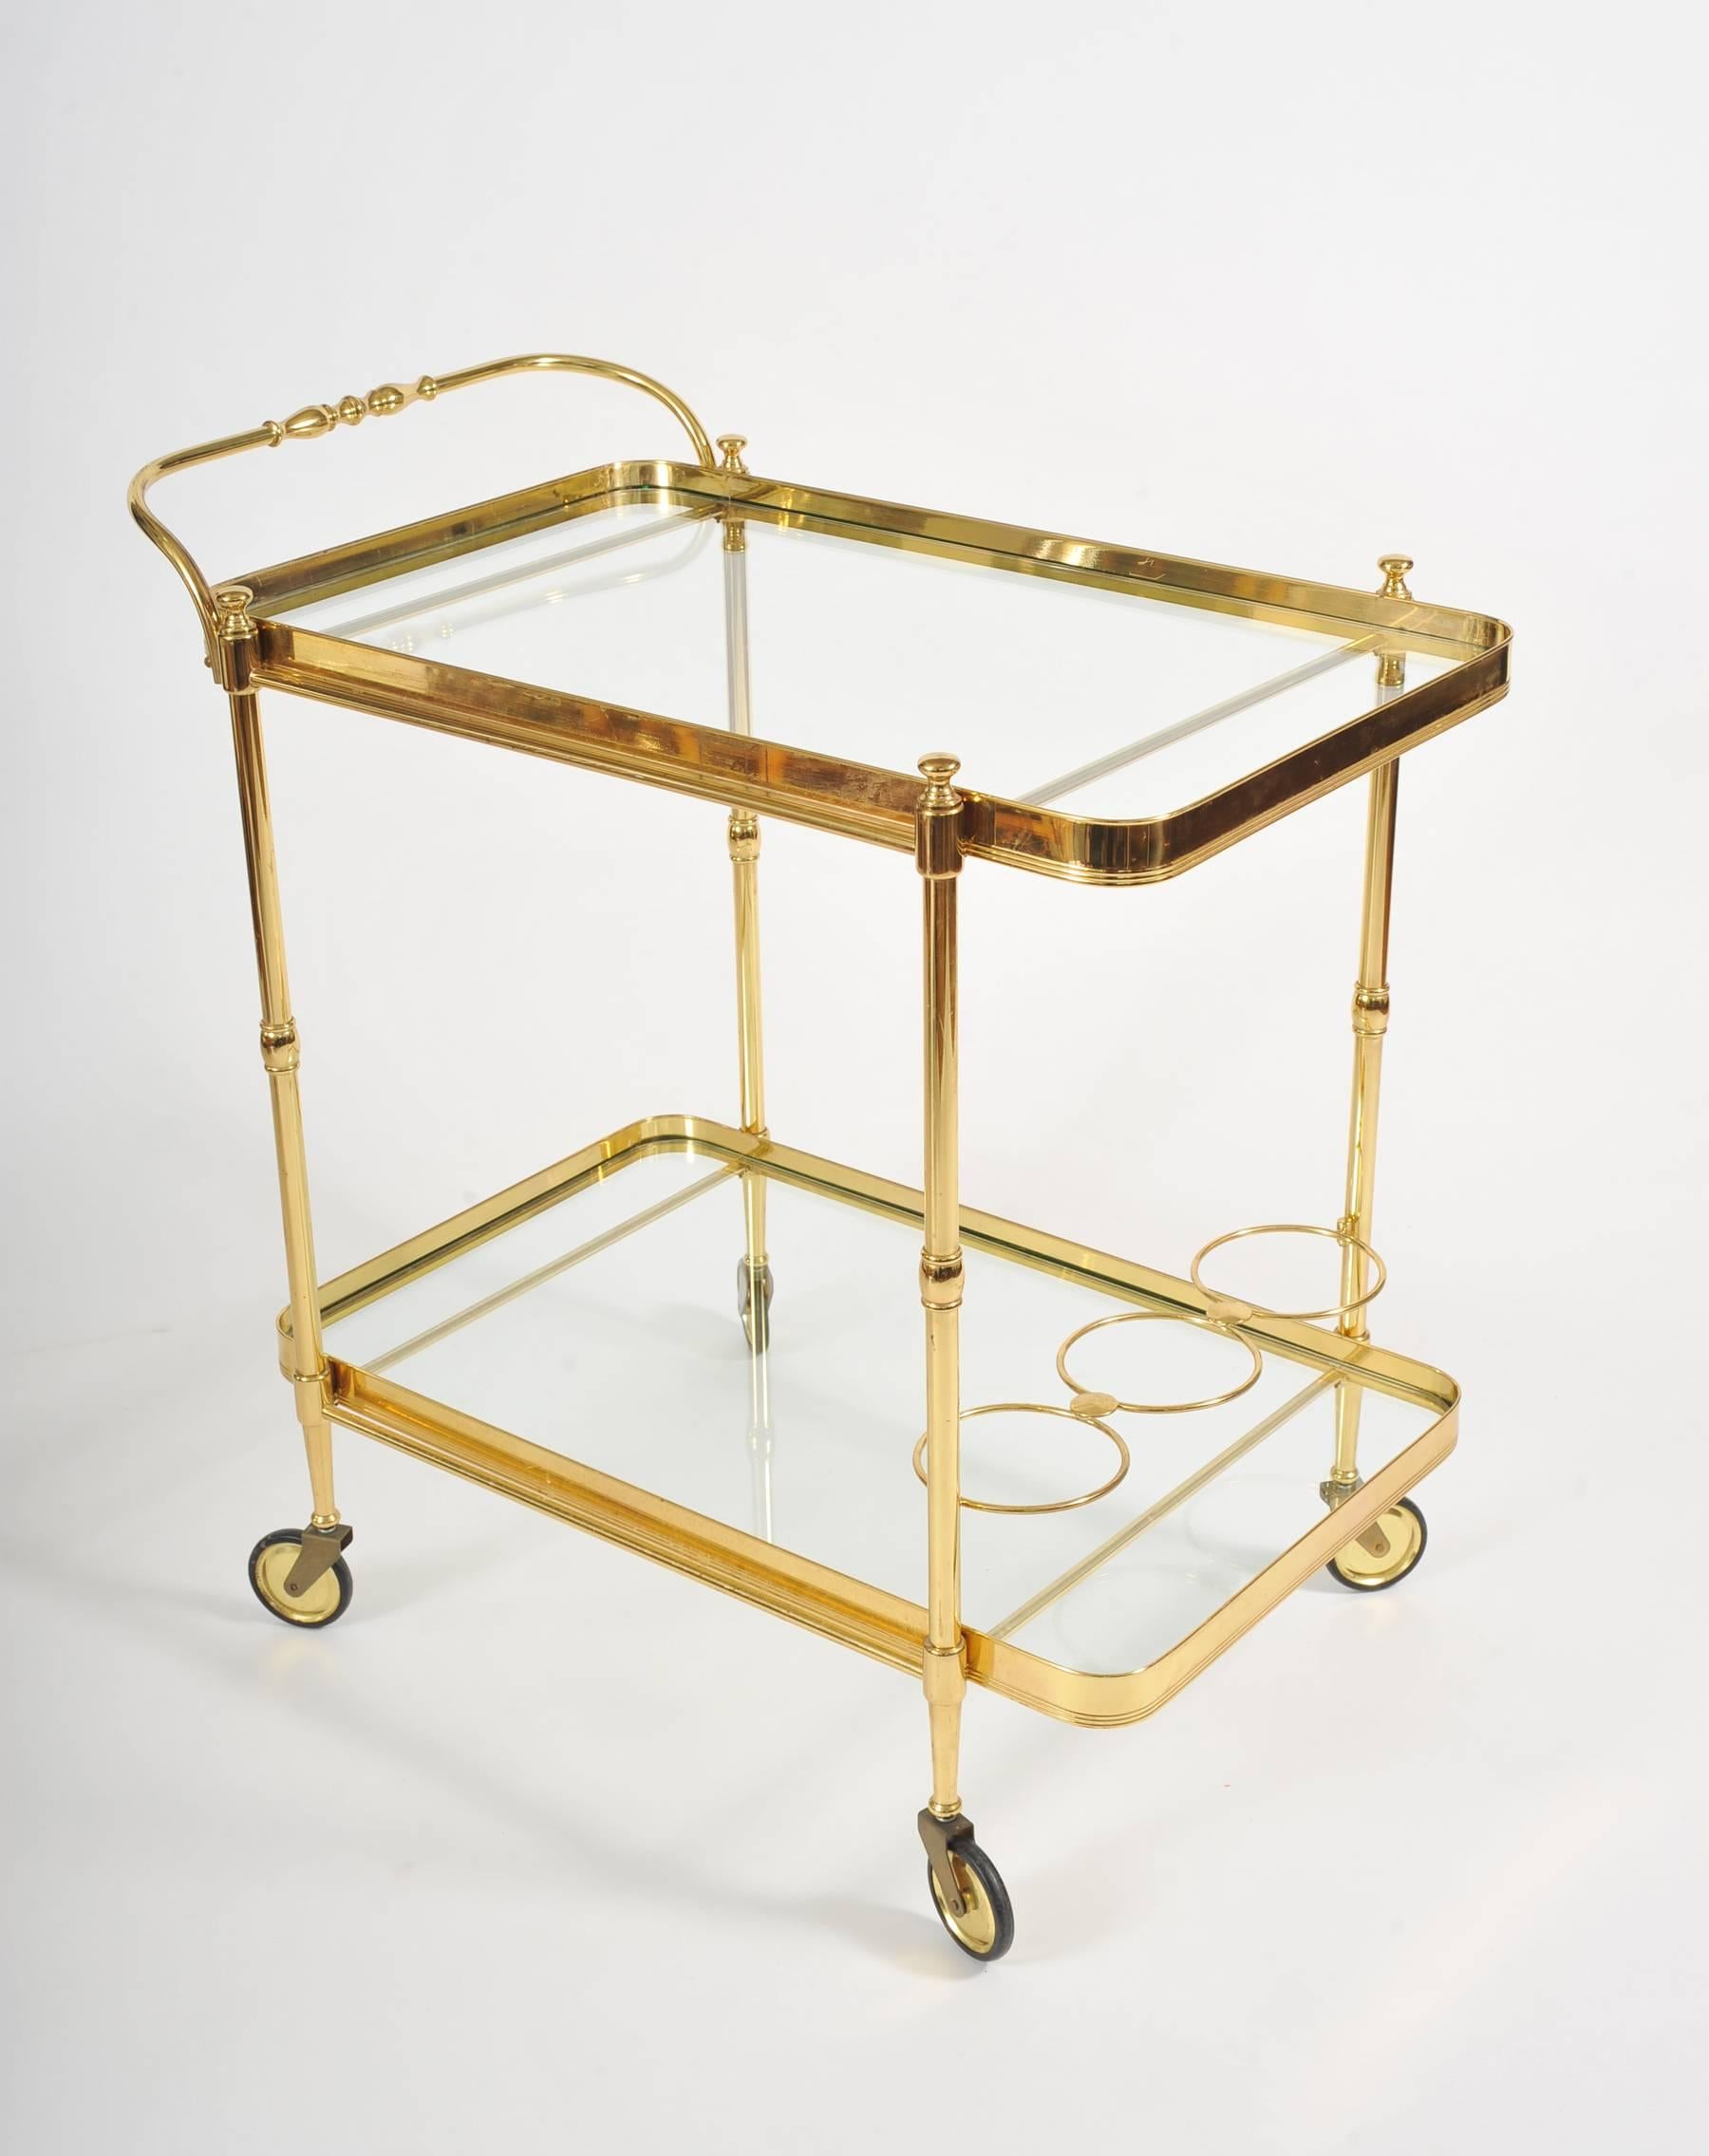 Brass drinks trolley with two glass shelves, curved corners and elegant handle. Brass holders to store bottles.